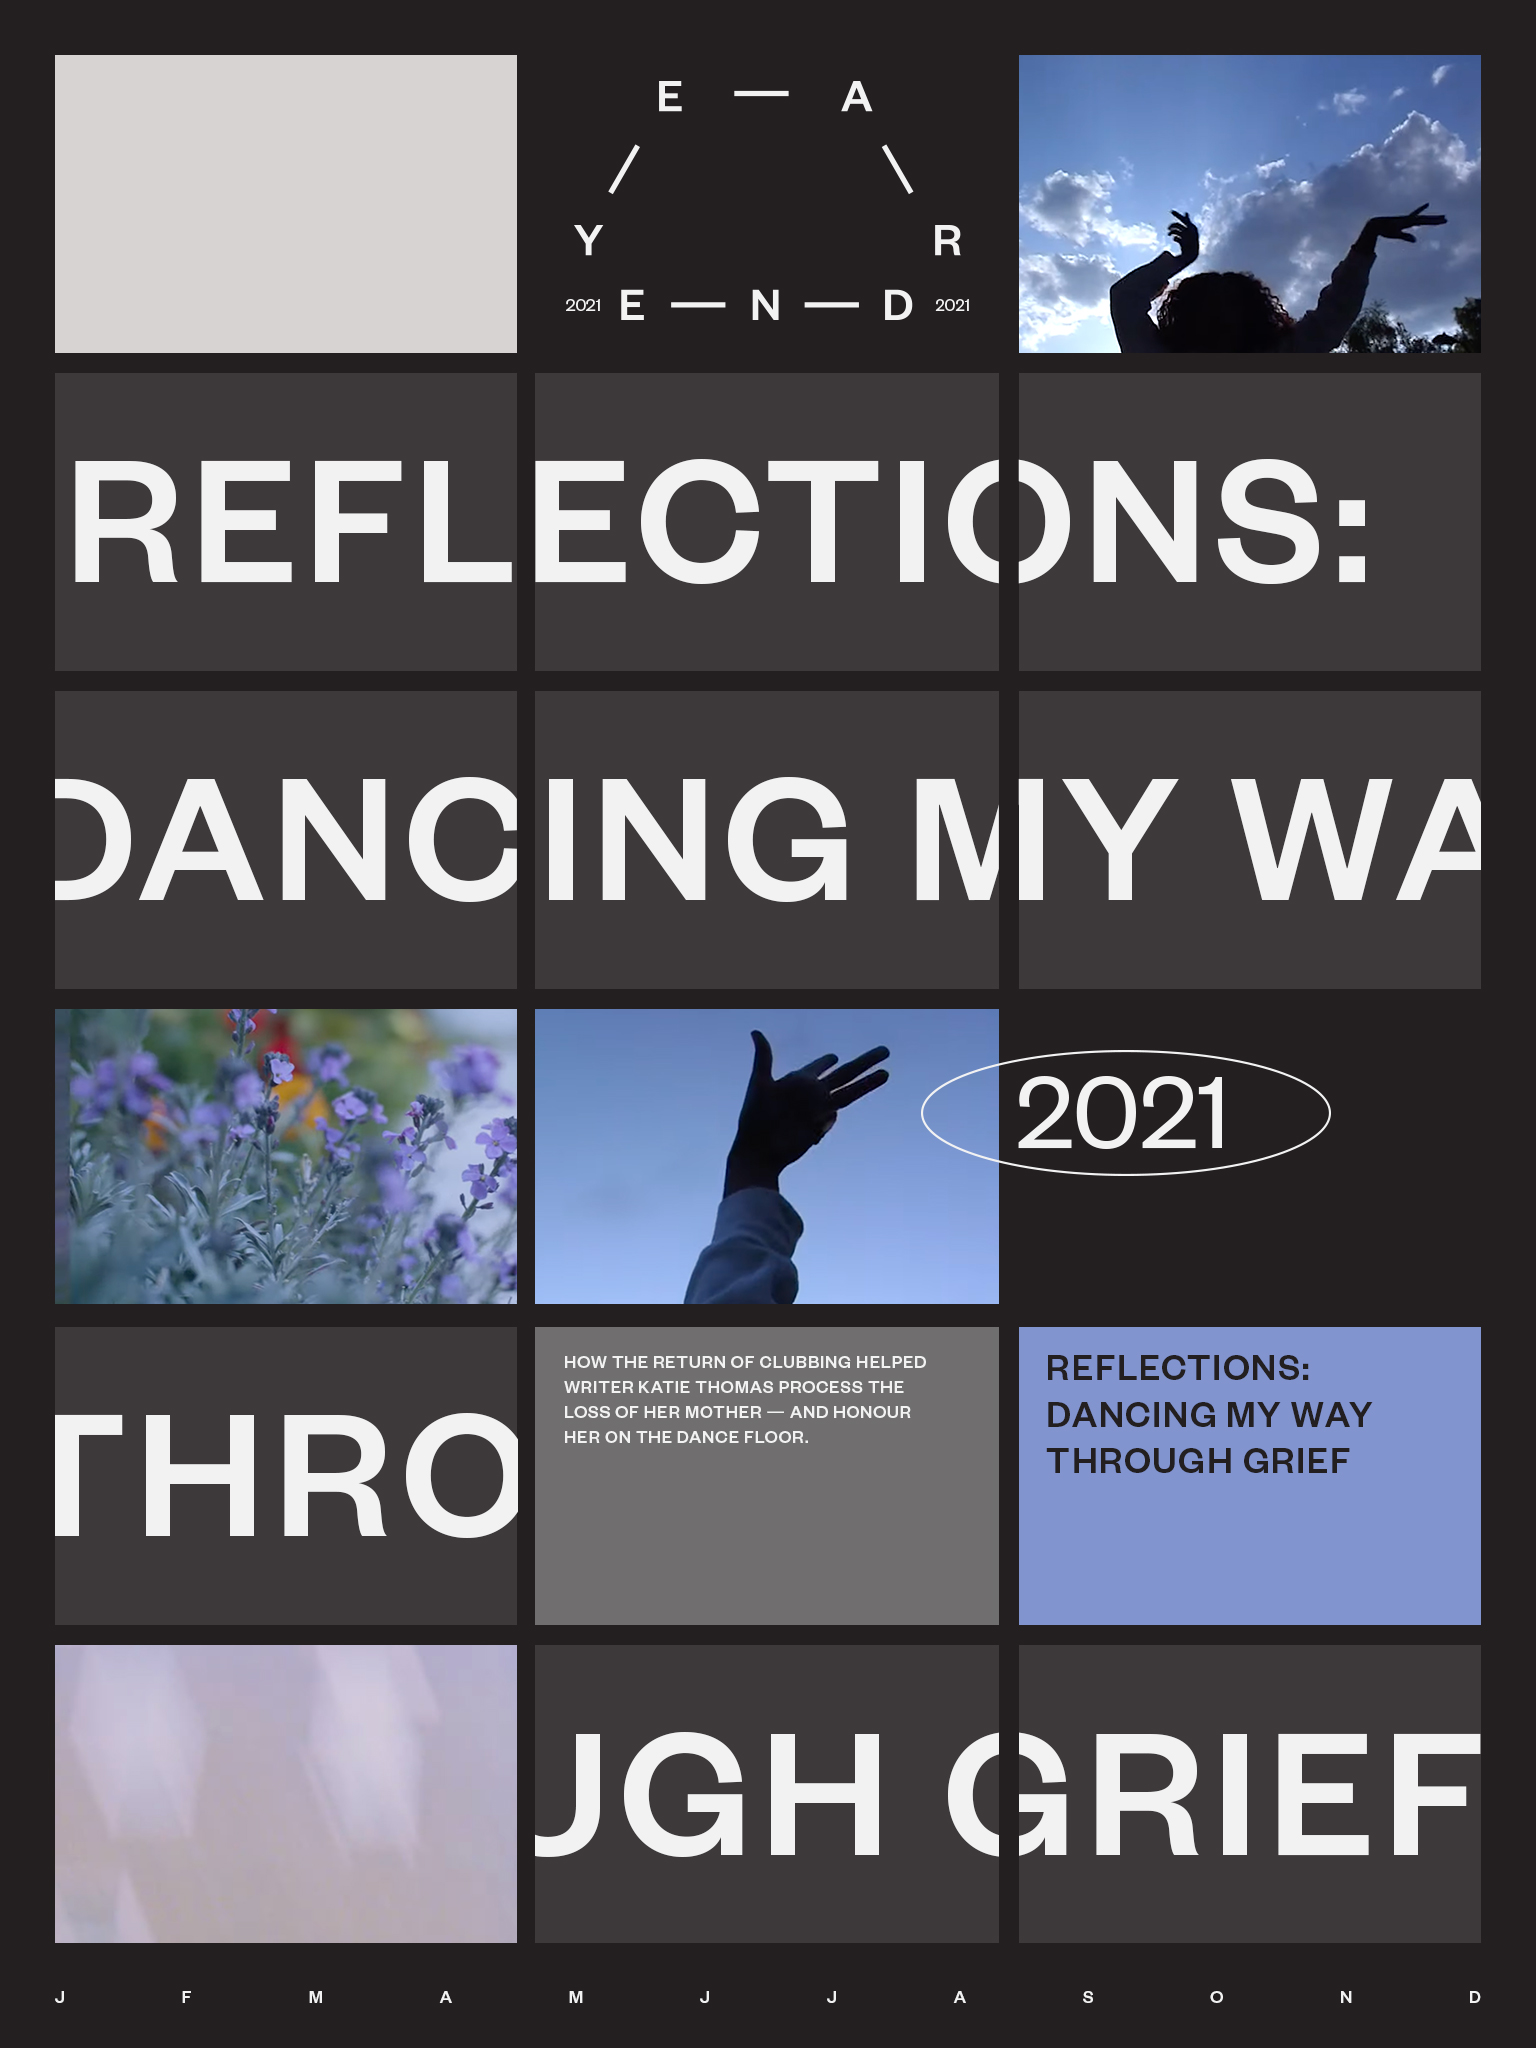 2021 Reflections: Dancing My Way Through Grief